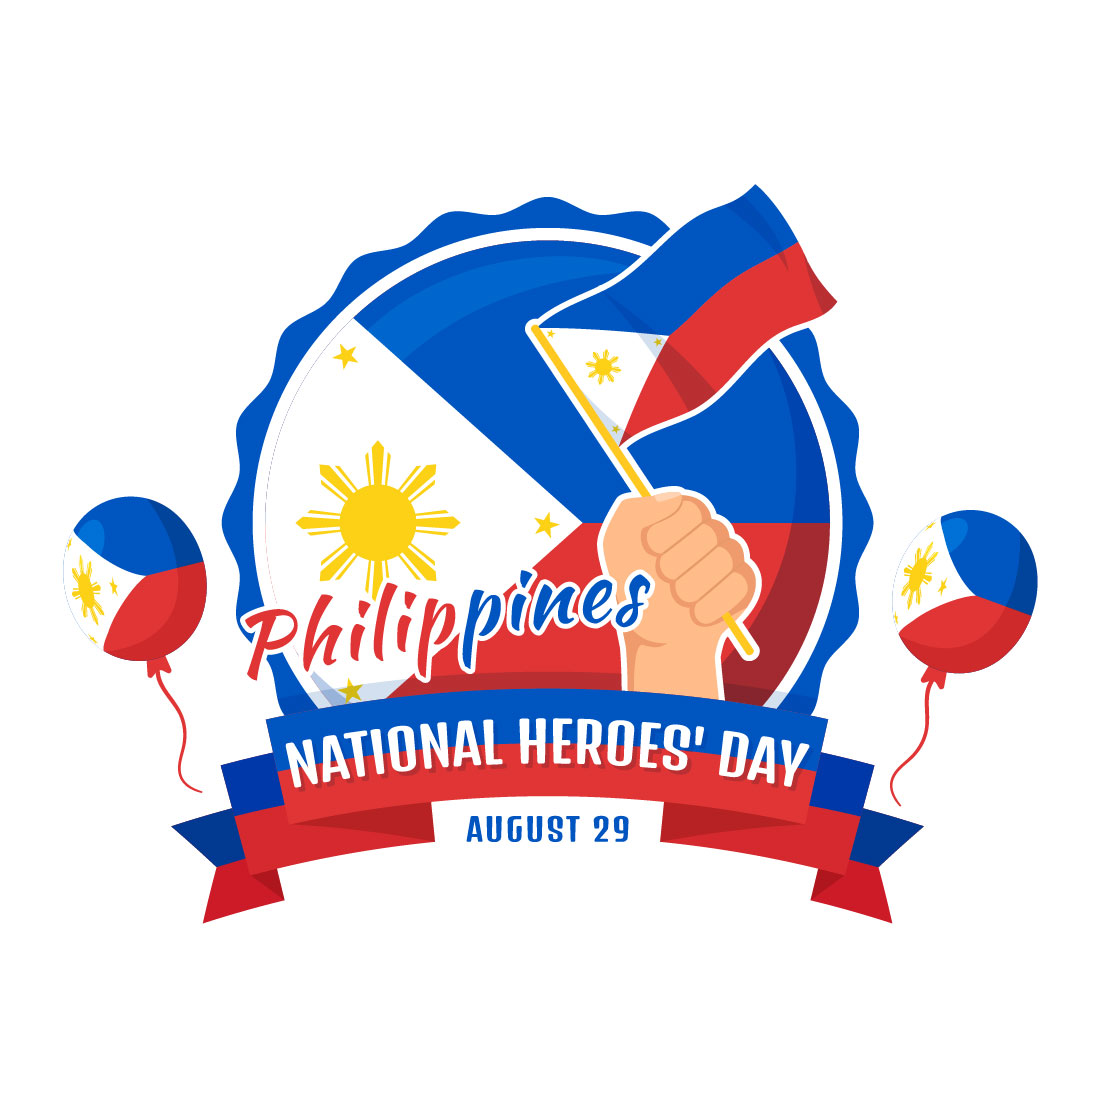 14 Philippines National Heroes Day Illustration cover image.